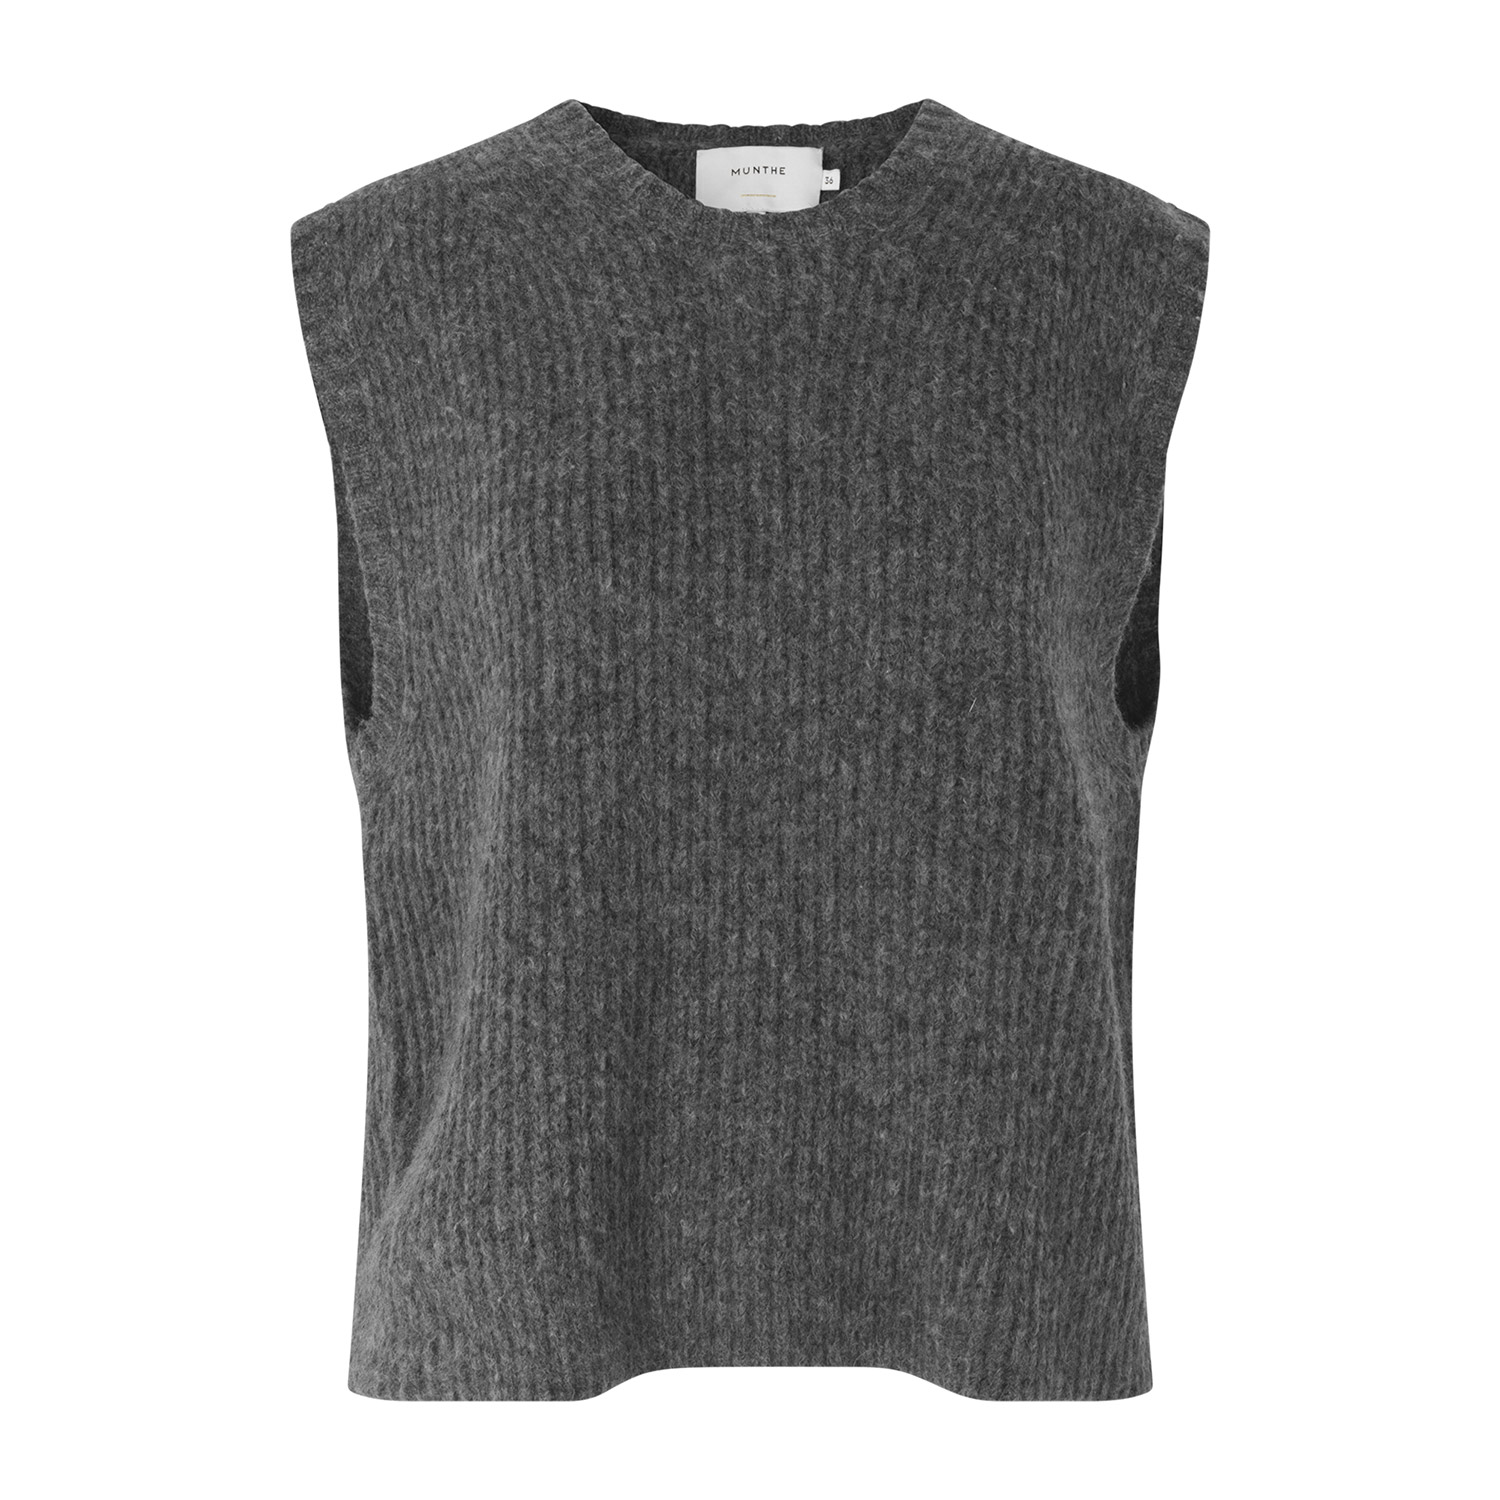 Munthe Roby Knit